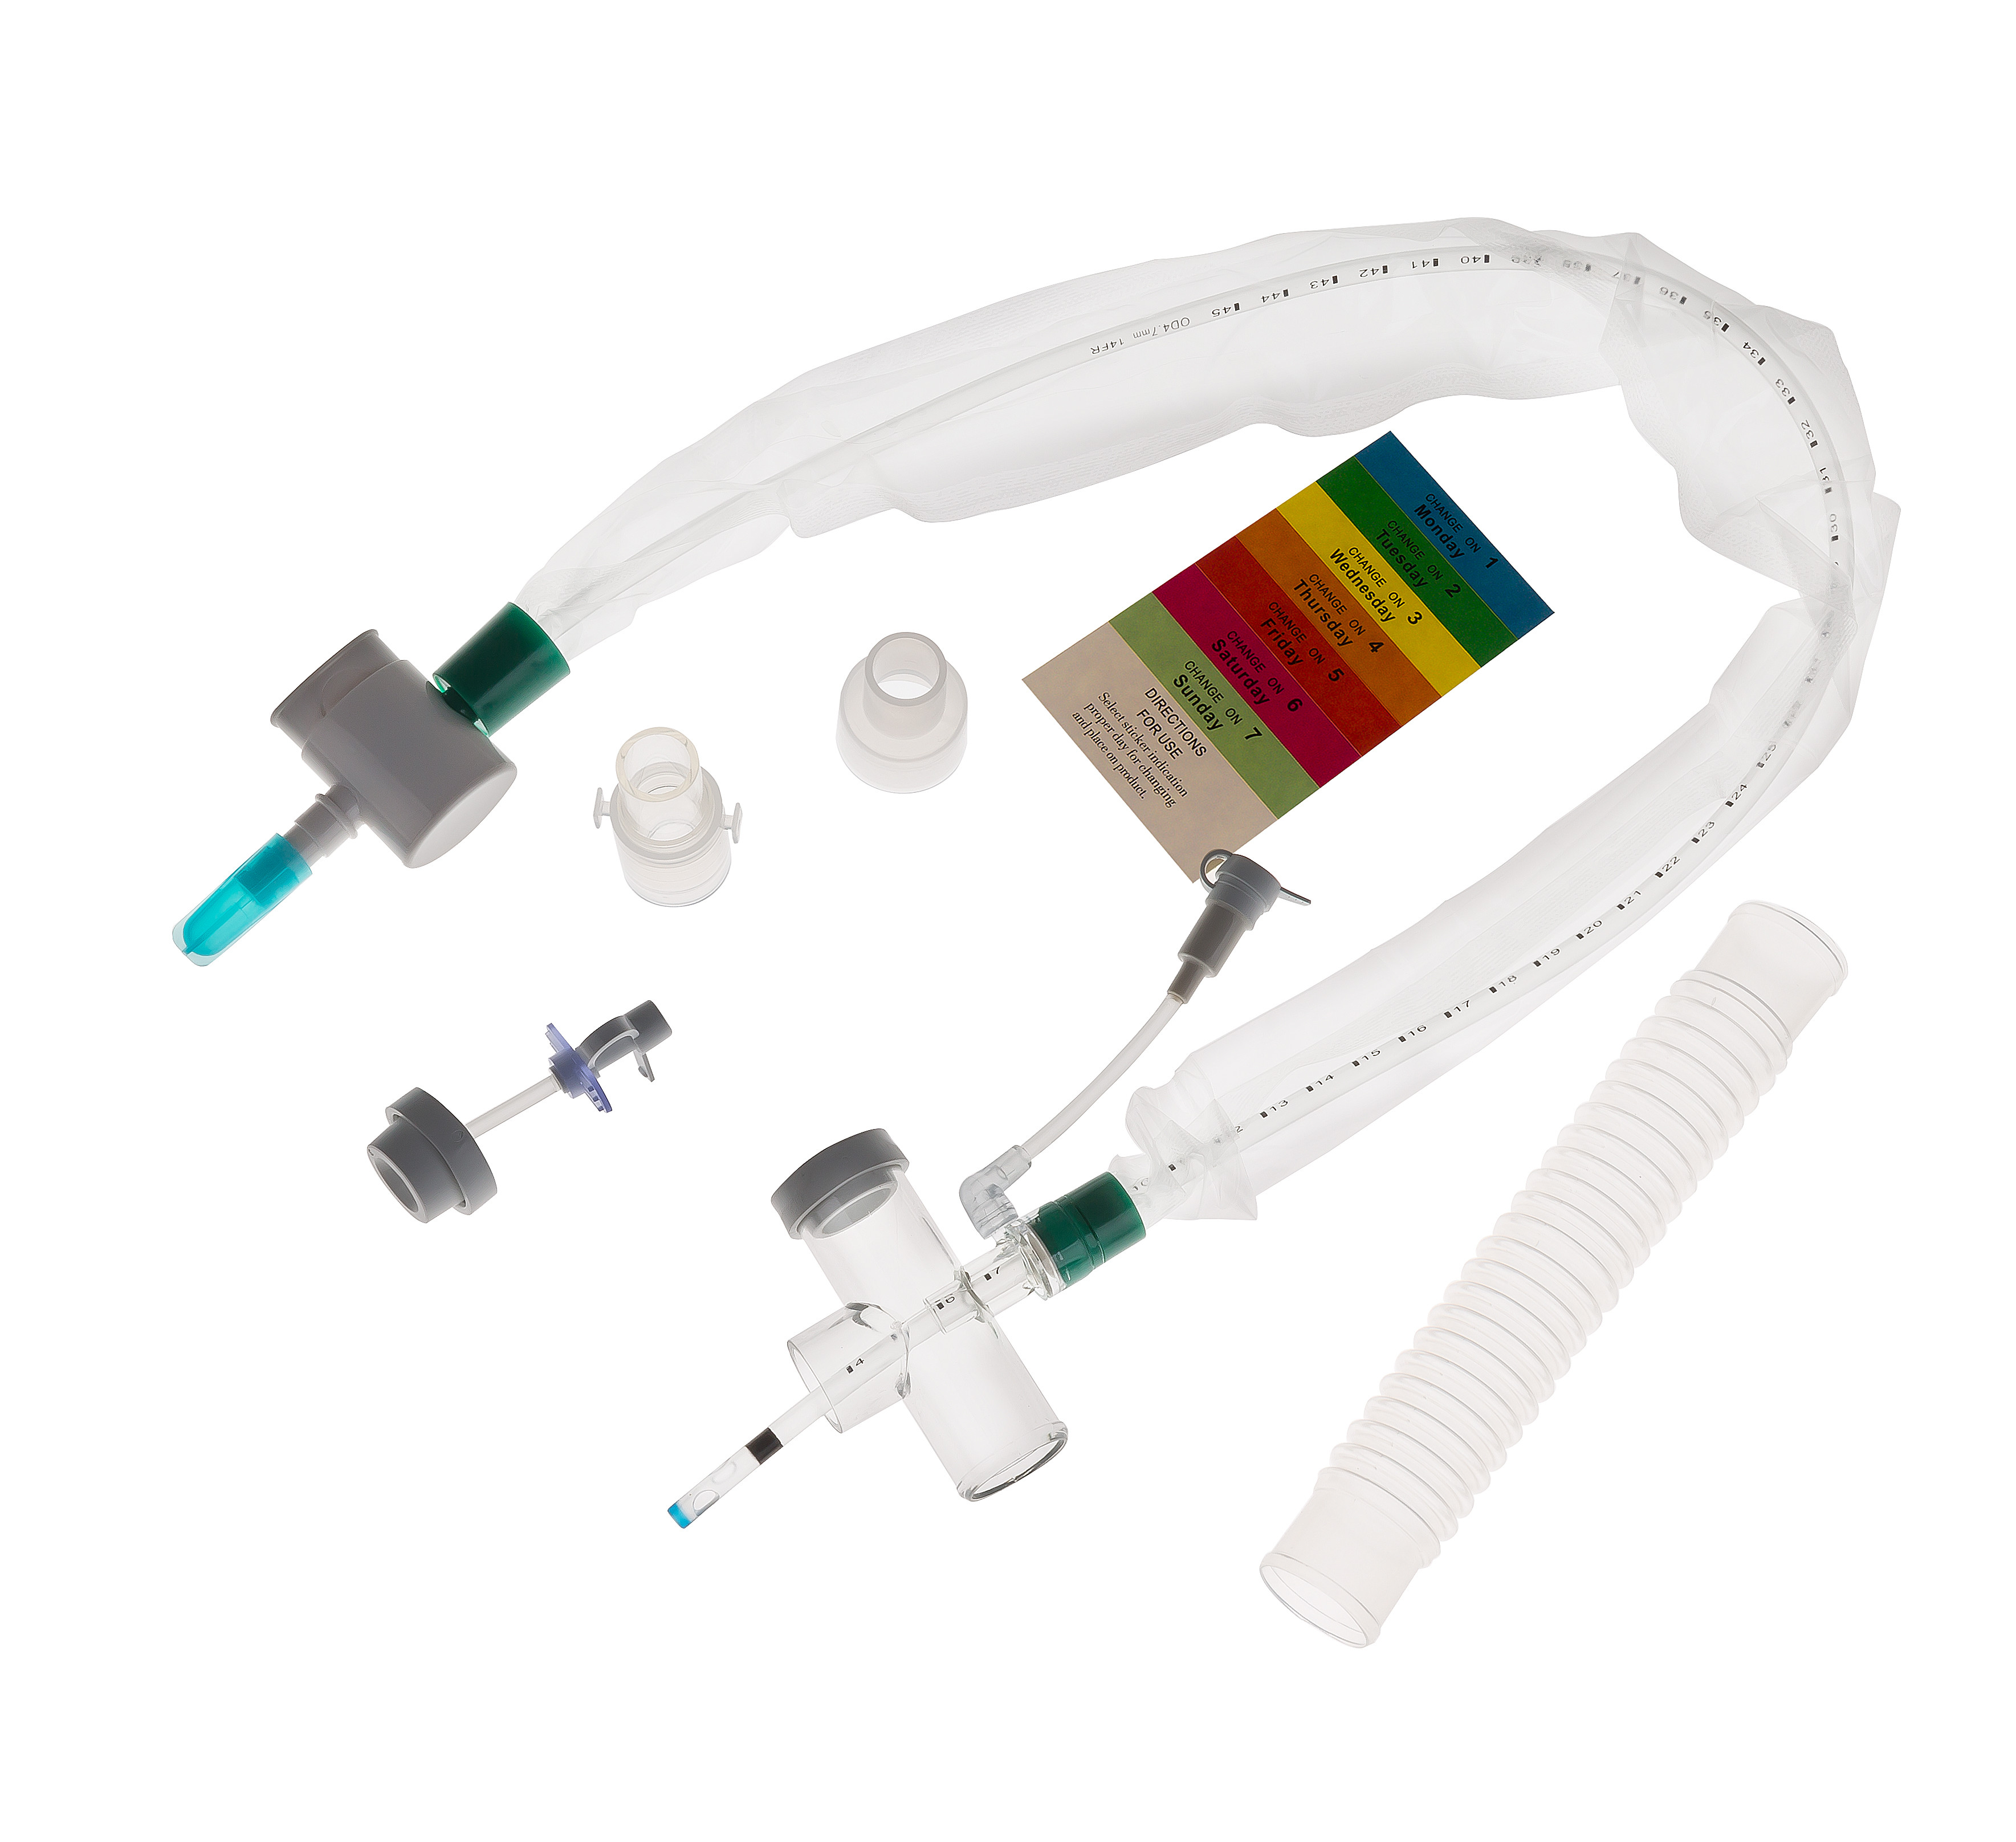  OEM Service MC 02427 Closed System Inline Suction Catheter 16Fr Manufactures